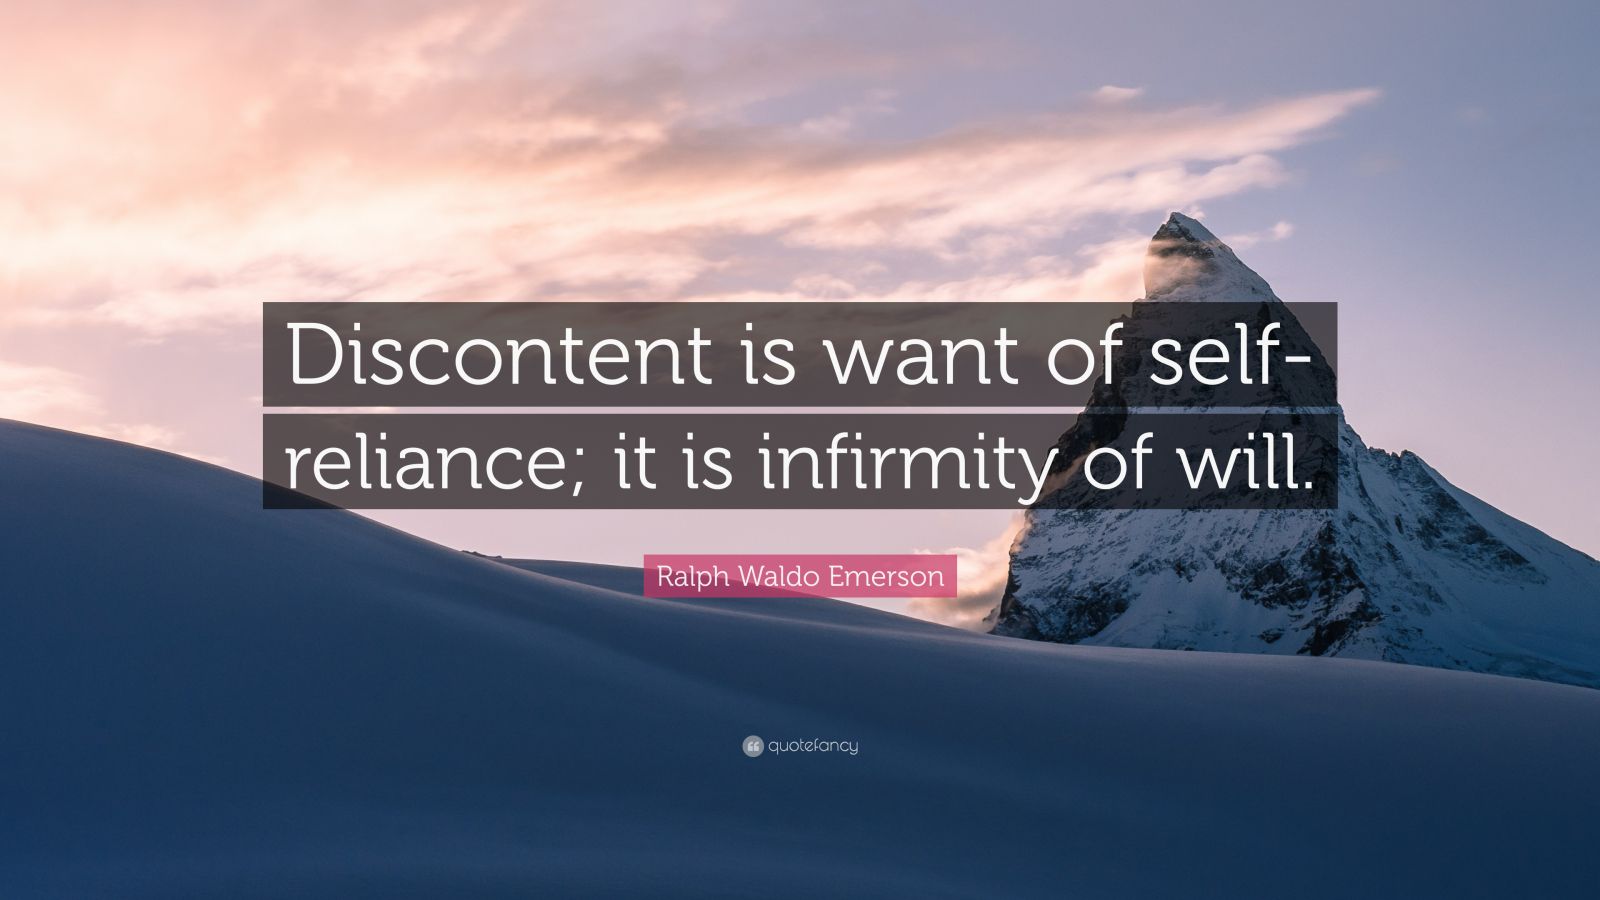 Ralph Waldo Emerson Quote: Discontent is want of self-reliance; it is